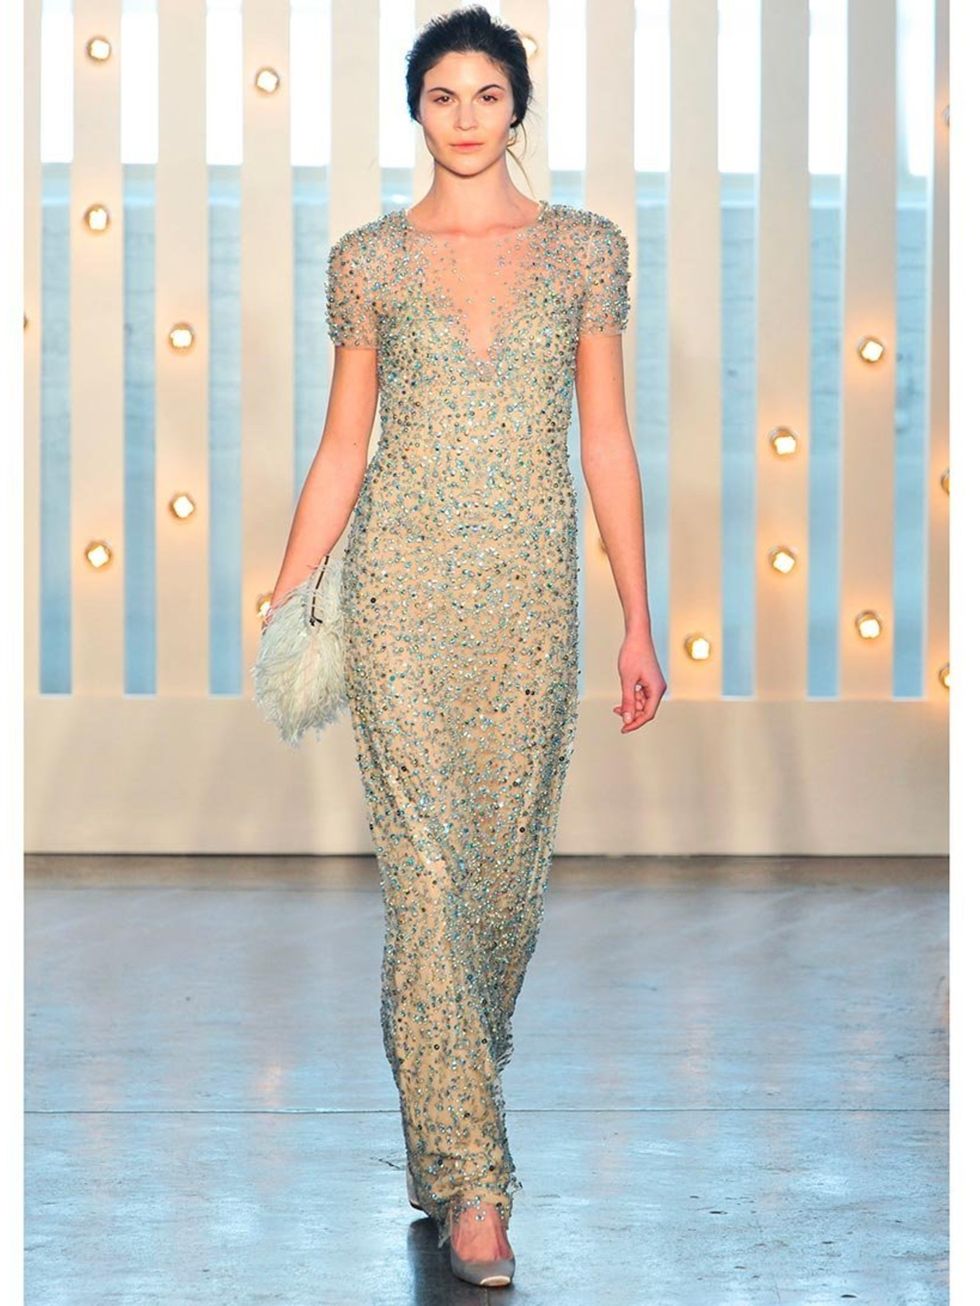 <p><a href="http://www.elleuk.com/catwalk/designer-a-z/jenny-packham/autumn-winter-2014">Jenny Packham</a> a/w 2014</p><p>This simple silhouette balances the intricate working of its crystal embellishment.</p><p><a href="http://www.elleuk.com/style/weddin